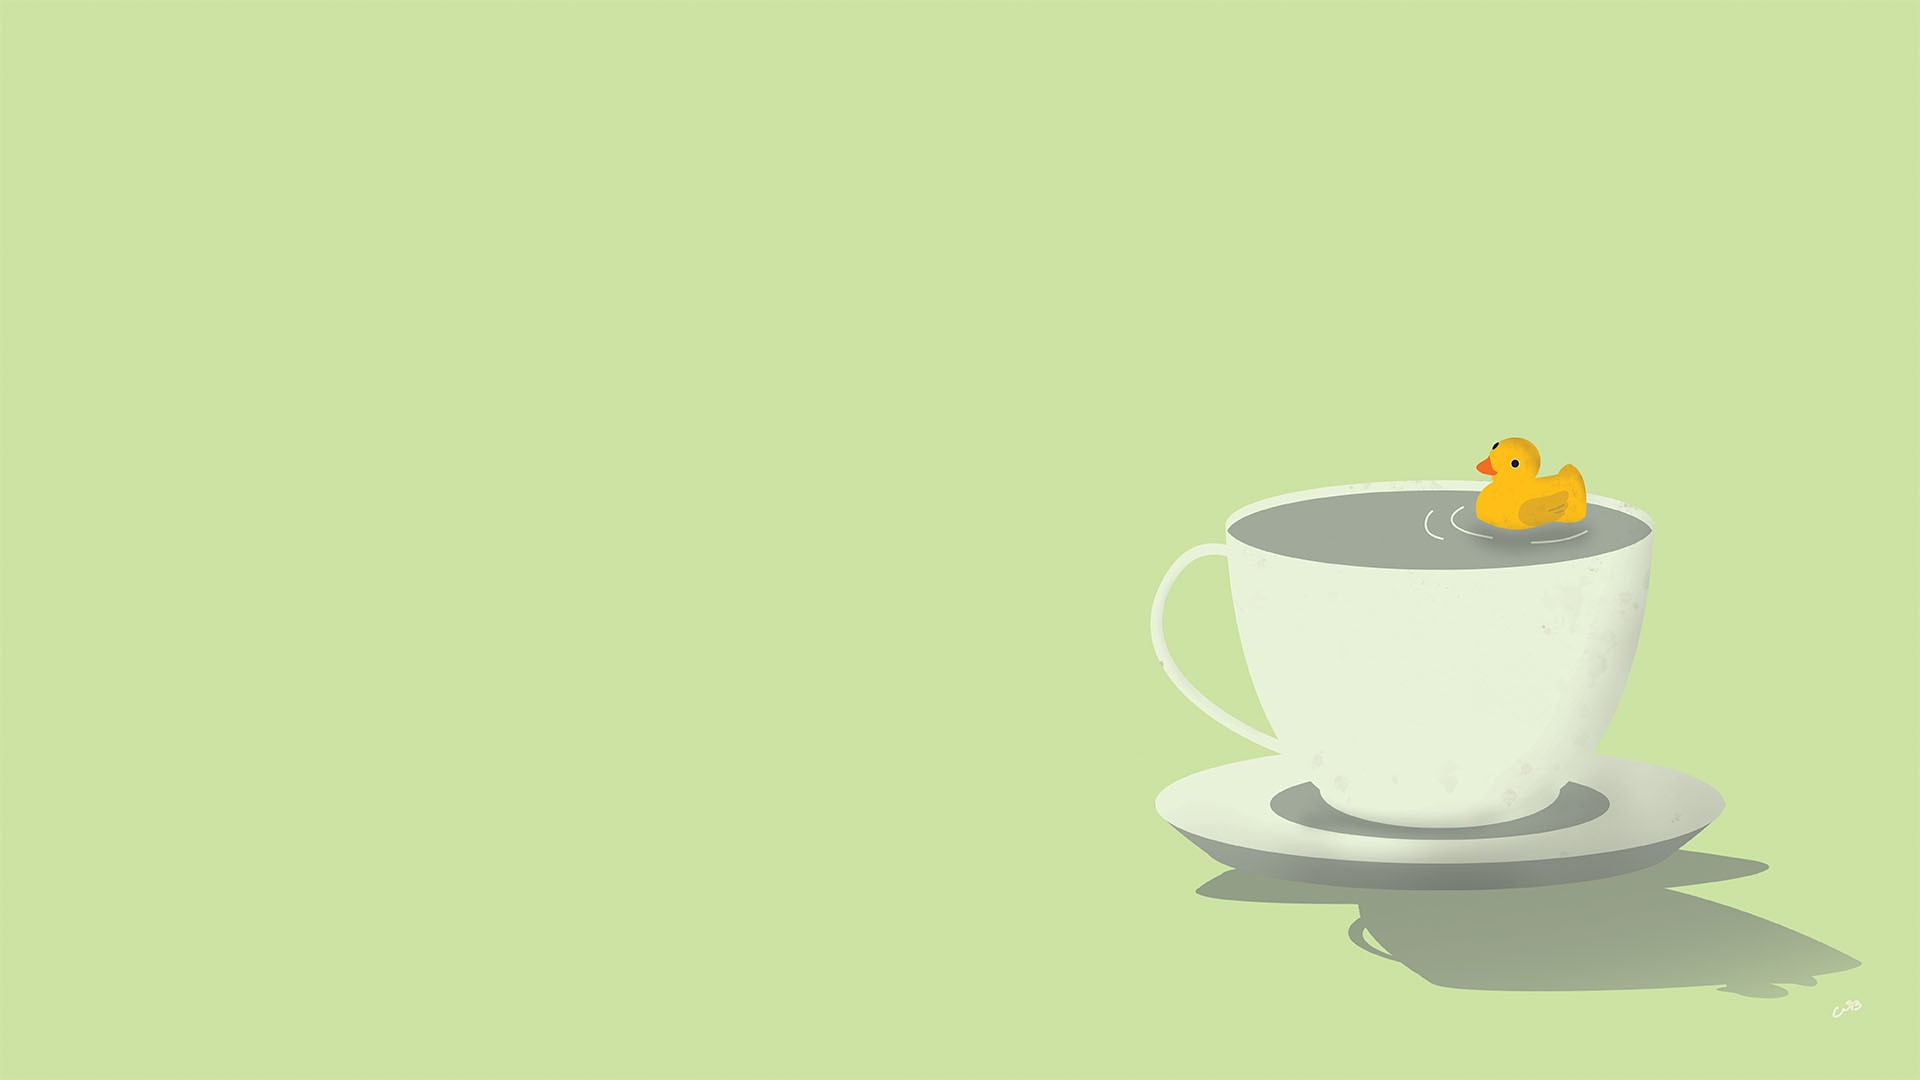 General 1920x1080 artwork cup rubber ducks simple background humor green background minimalism